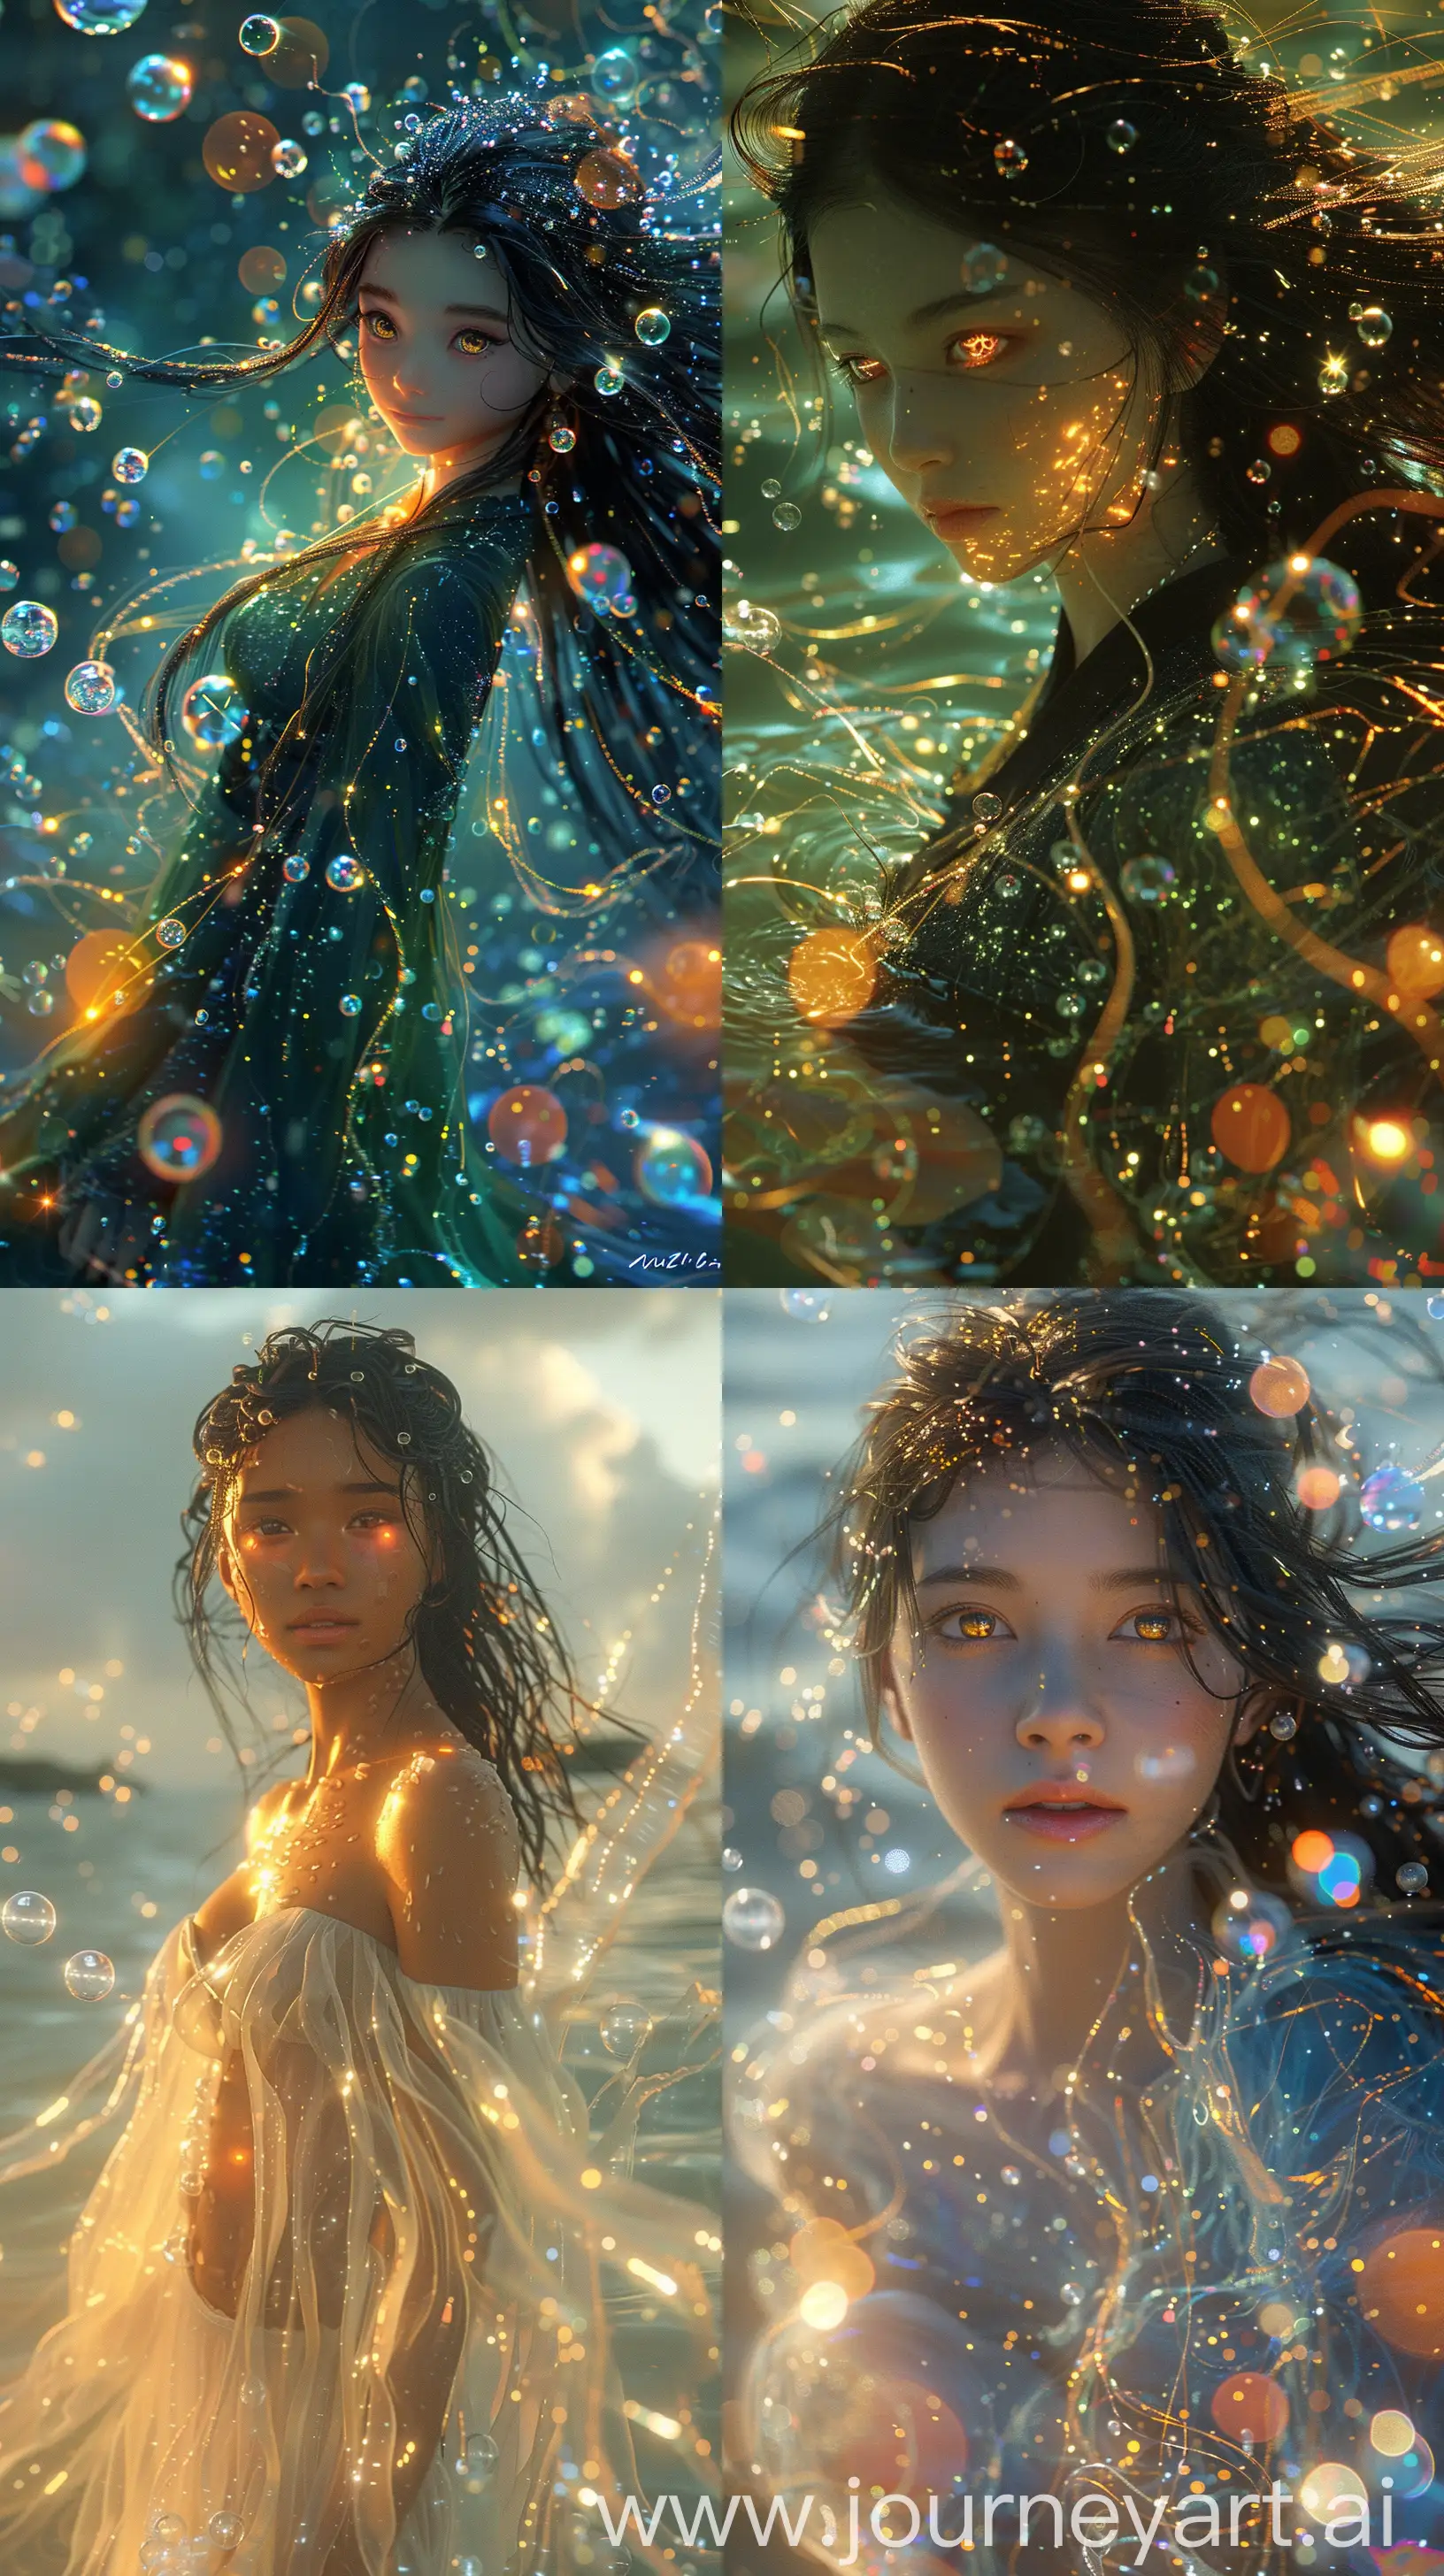 Ethereal-Woman-Standing-in-Water-Fantasy-Art-Inspired-by-Yanjun-Cheng